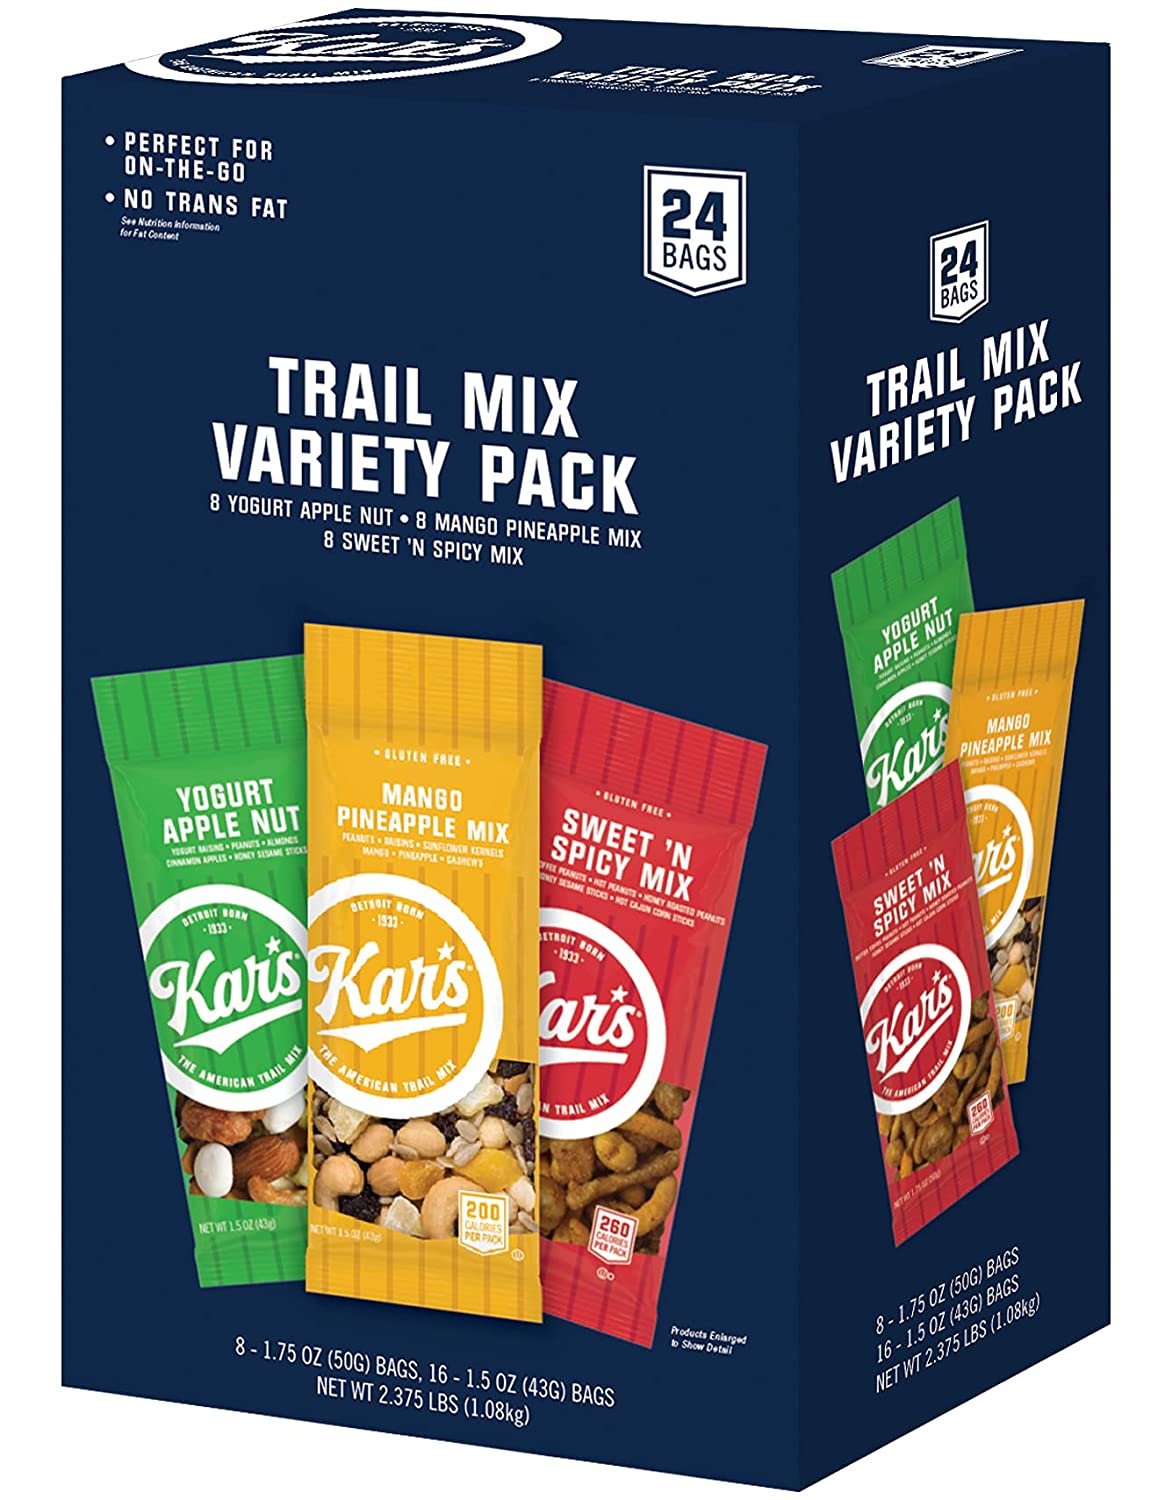 TRAIL MIX VARIETY PACK